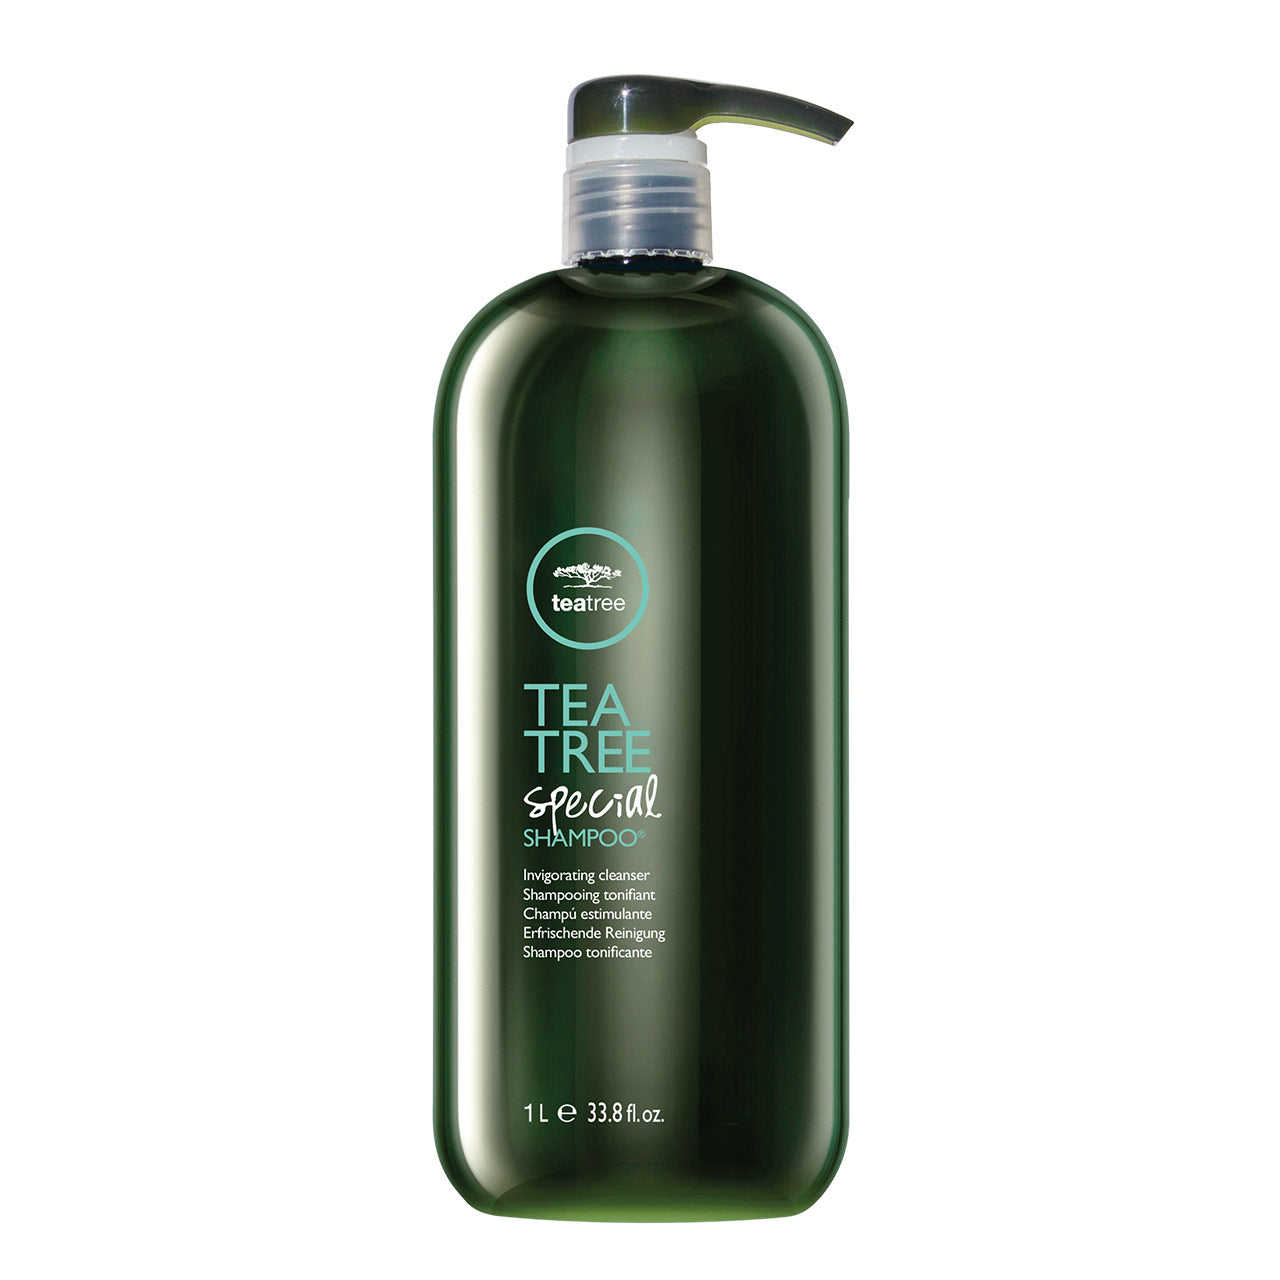 Tea Tree Special Shampoo - 1L - by Paul Mitchell |ProCare Outlet|